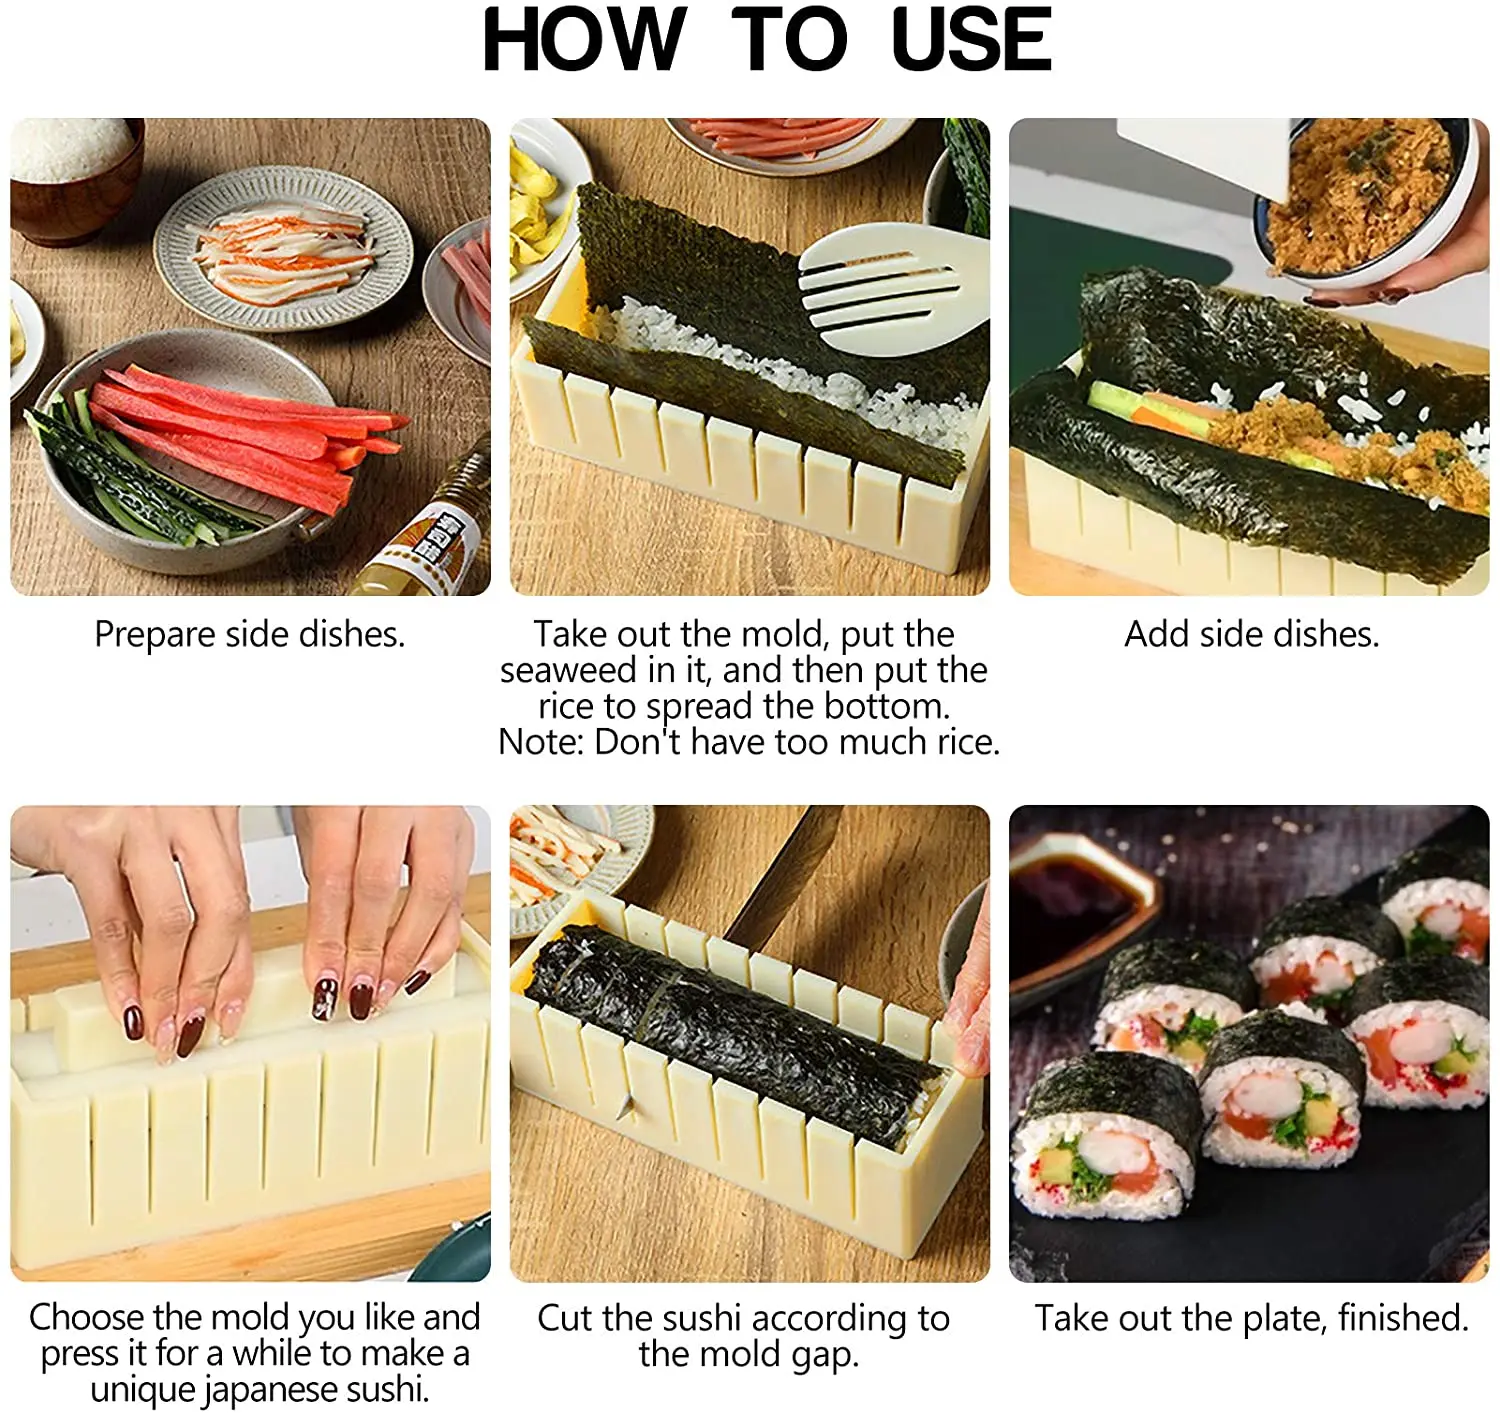 GLN KITCHEN: Sushi Making Kit Deluxe Edition japanes Set 11 Piece Plastic  Maker Tool 8 Rice Roll Mold Shapes Fork Spatula knife (easy, fun, quick)  for